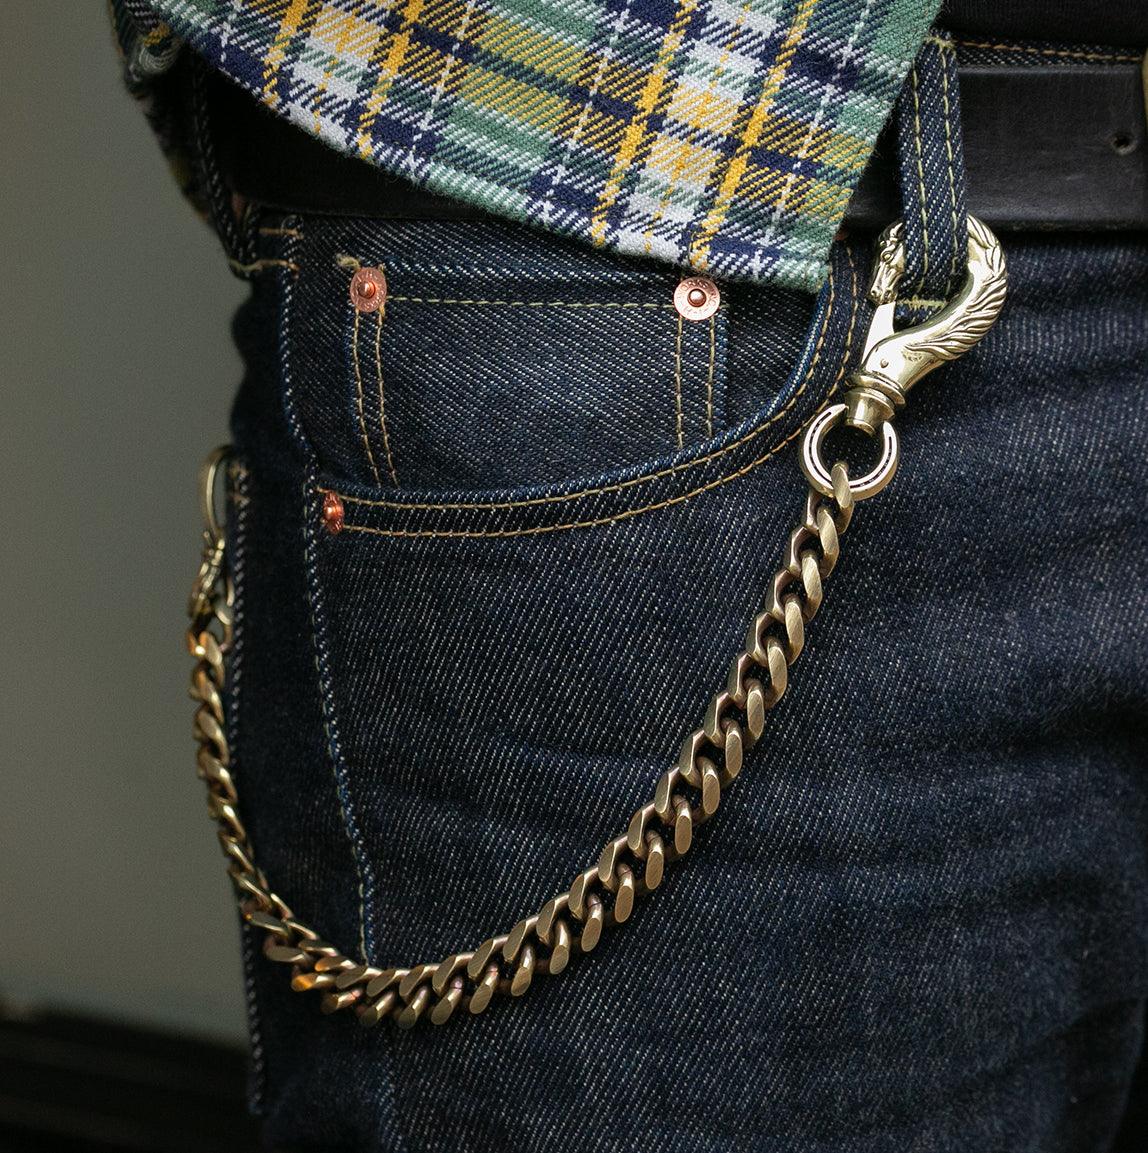 Image showing the Peanuts & Co Horse Wallet Chain (horse×horse) - Brass which is a WALLETS AND CHAINS described by the following info Accessories, Peanuts & Co, Released, WALLETS AND CHAINS and sold on the IRON HEART GERMANY online store